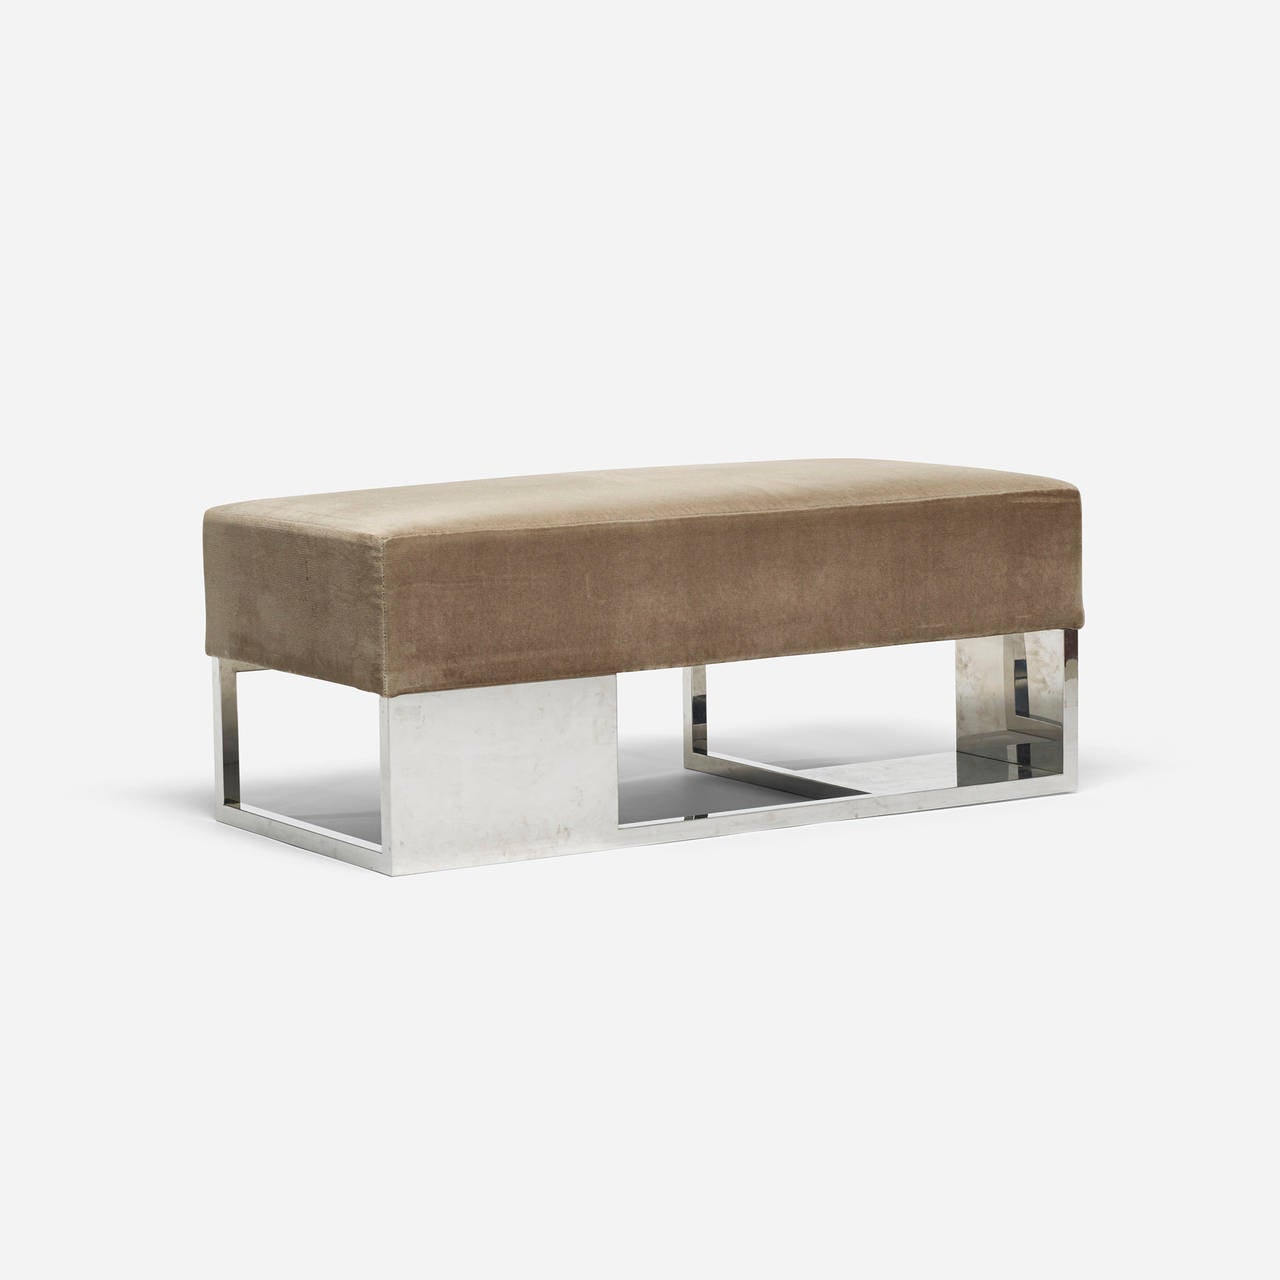 American Bench for Gucci by Studio Sofield Inc.